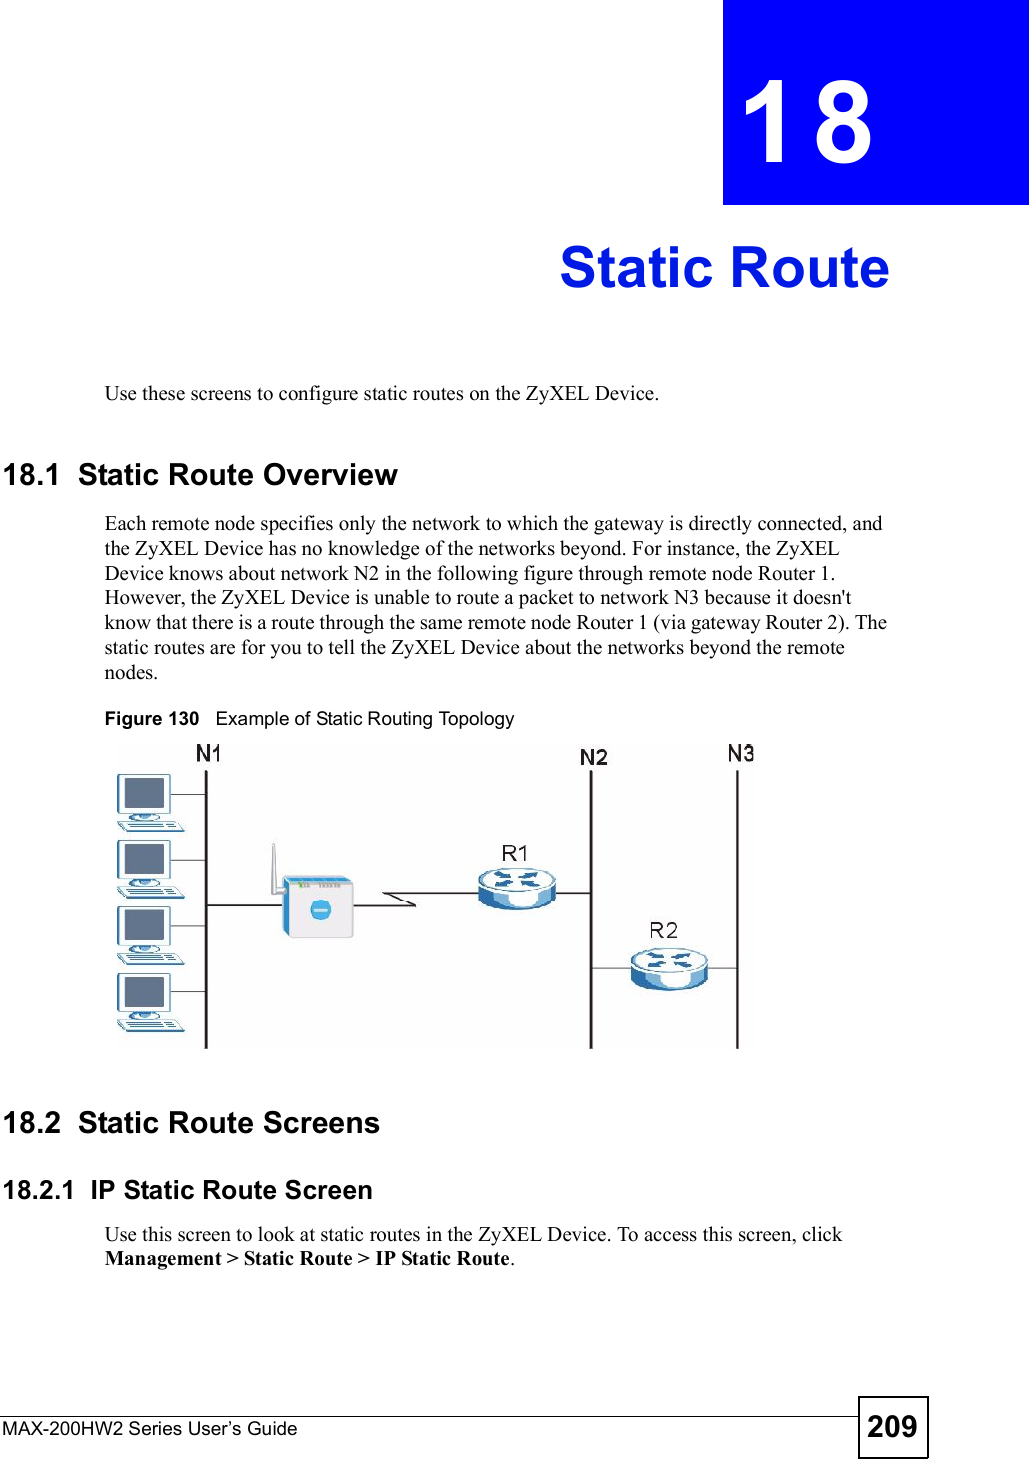 MAX-200HW2 Series User s Guide 209CHAPTER 18Static RouteUse these screens to configure static routes on the ZyXEL Device.18.1  Static Route OverviewEach remote node specifies only the network to which the gateway is directly connected, and the ZyXEL Device has no knowledge of the networks beyond. For instance, the ZyXEL Device knows about network N2 in the following figure through remote node Router 1. However, the ZyXEL Device is unable to route a packet to network N3 because it doesn&apos;t know that there is a route through the same remote node Router 1 (via gateway Router 2). The static routes are for you to tell the ZyXEL Device about the networks beyond the remote nodes.Figure 130   Example of Static Routing Topology18.2  Static Route Screens18.2.1  IP Static Route ScreenUse this screen to look at static routes in the ZyXEL Device. To access this screen, click Management &gt; Static Route &gt; IP Static Route.